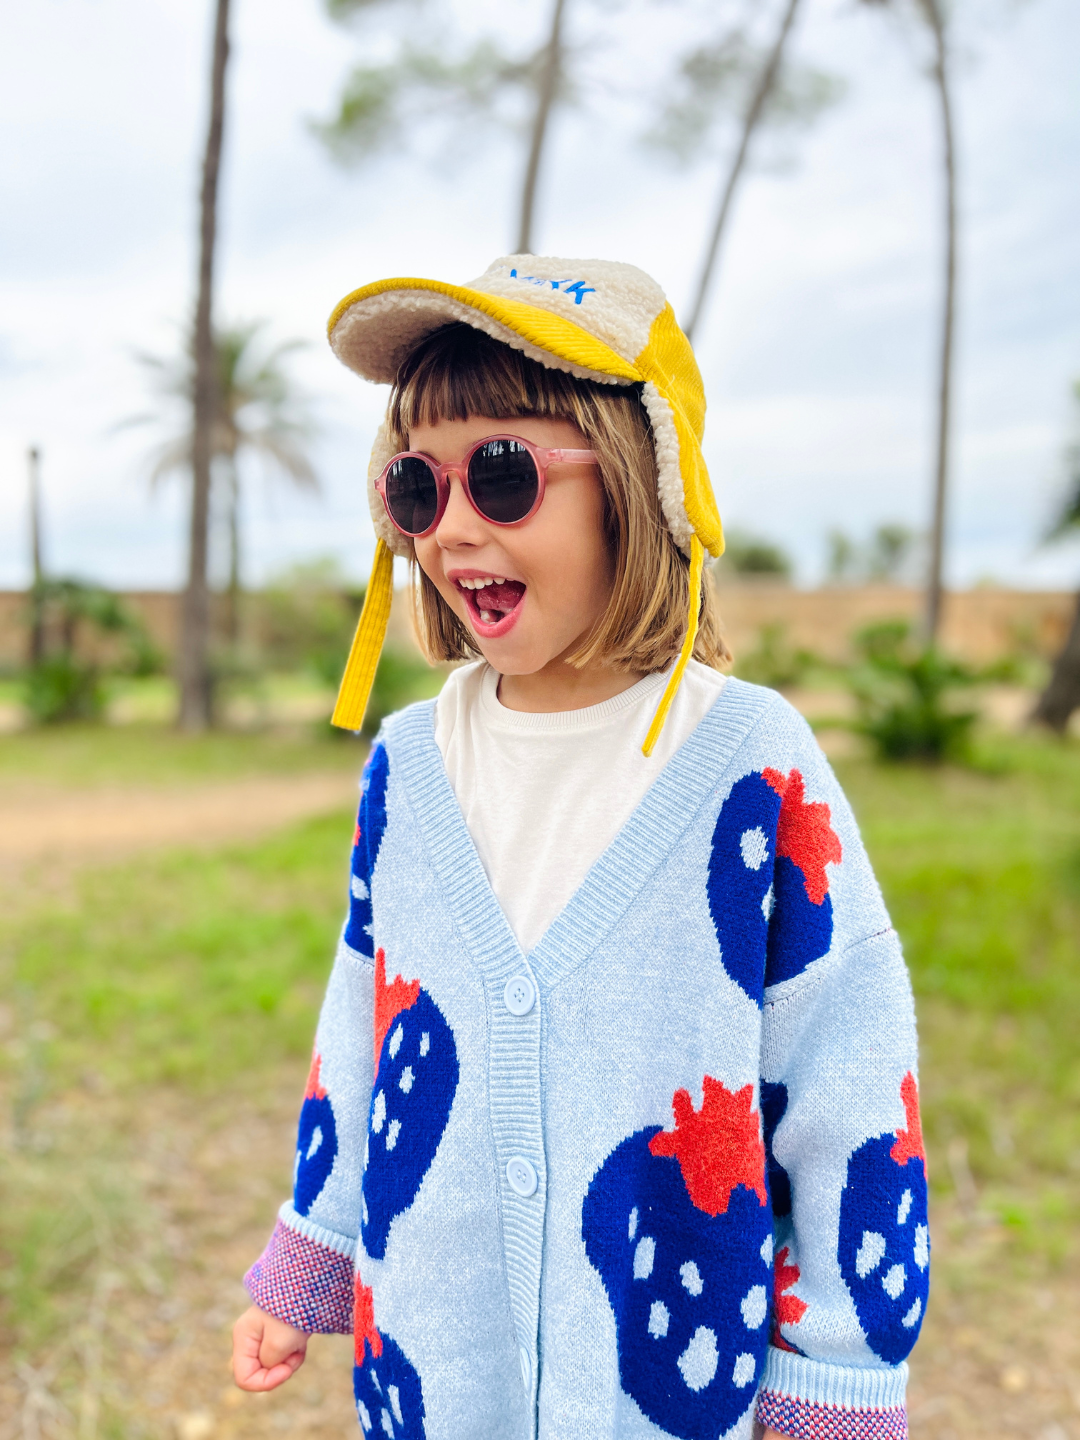 A girl wearing a kids v-neck cardigan in light blue with an all-over pattern of large blue strawberries with a red leaf, in an oversized fit. She is standing in a green park with palm trees in the distance, and wearing a white t-shirt, a yellow cap with ear flaps, and pink sunglasses.